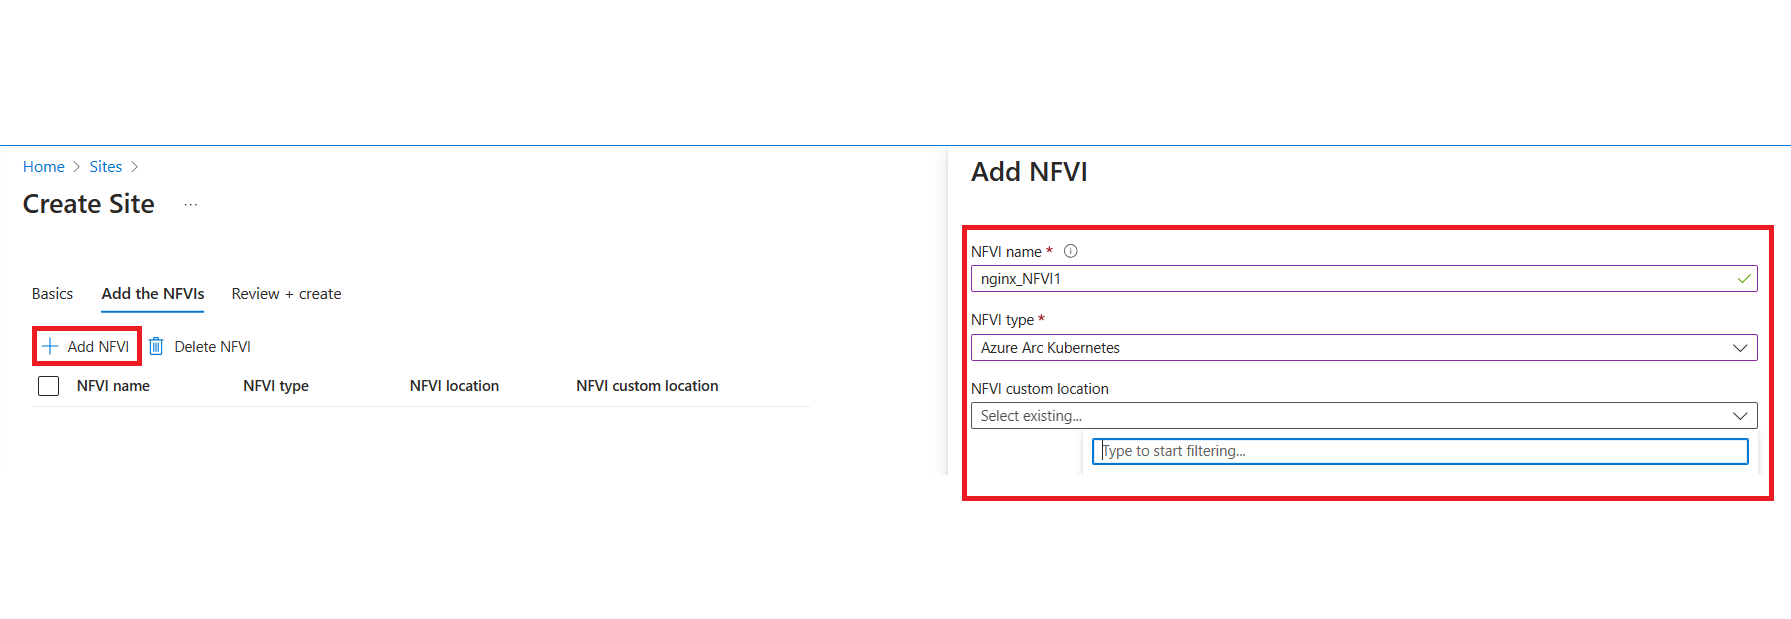 Screenshot showing the Add the NFVIs table to enter the name, type and location of the NFVIs.